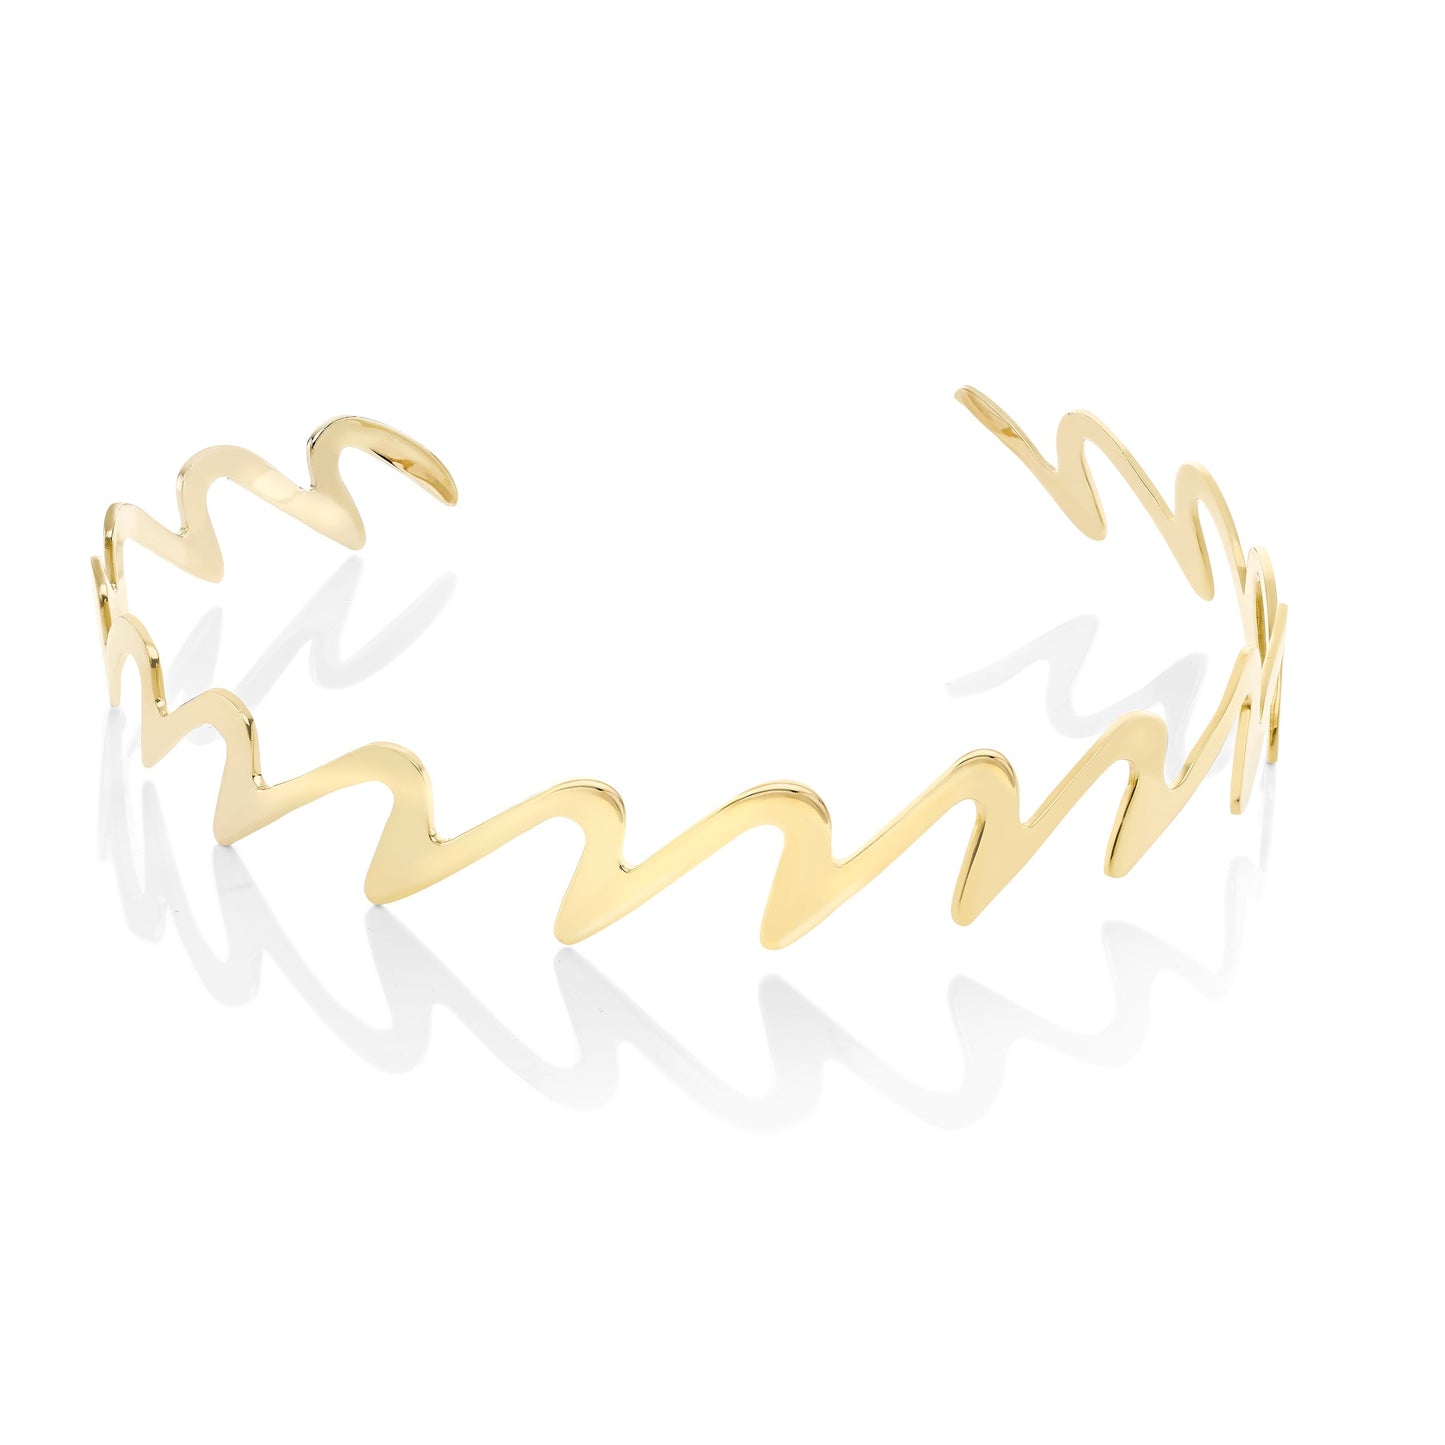 Load image into Gallery viewer, British Luxury jewellery piece, 18ct Yellow Gold plated Sterling Silver Wedeln Torc – Gstaad Collection, Augustine Jewellery, Luxury Jewellery London.
